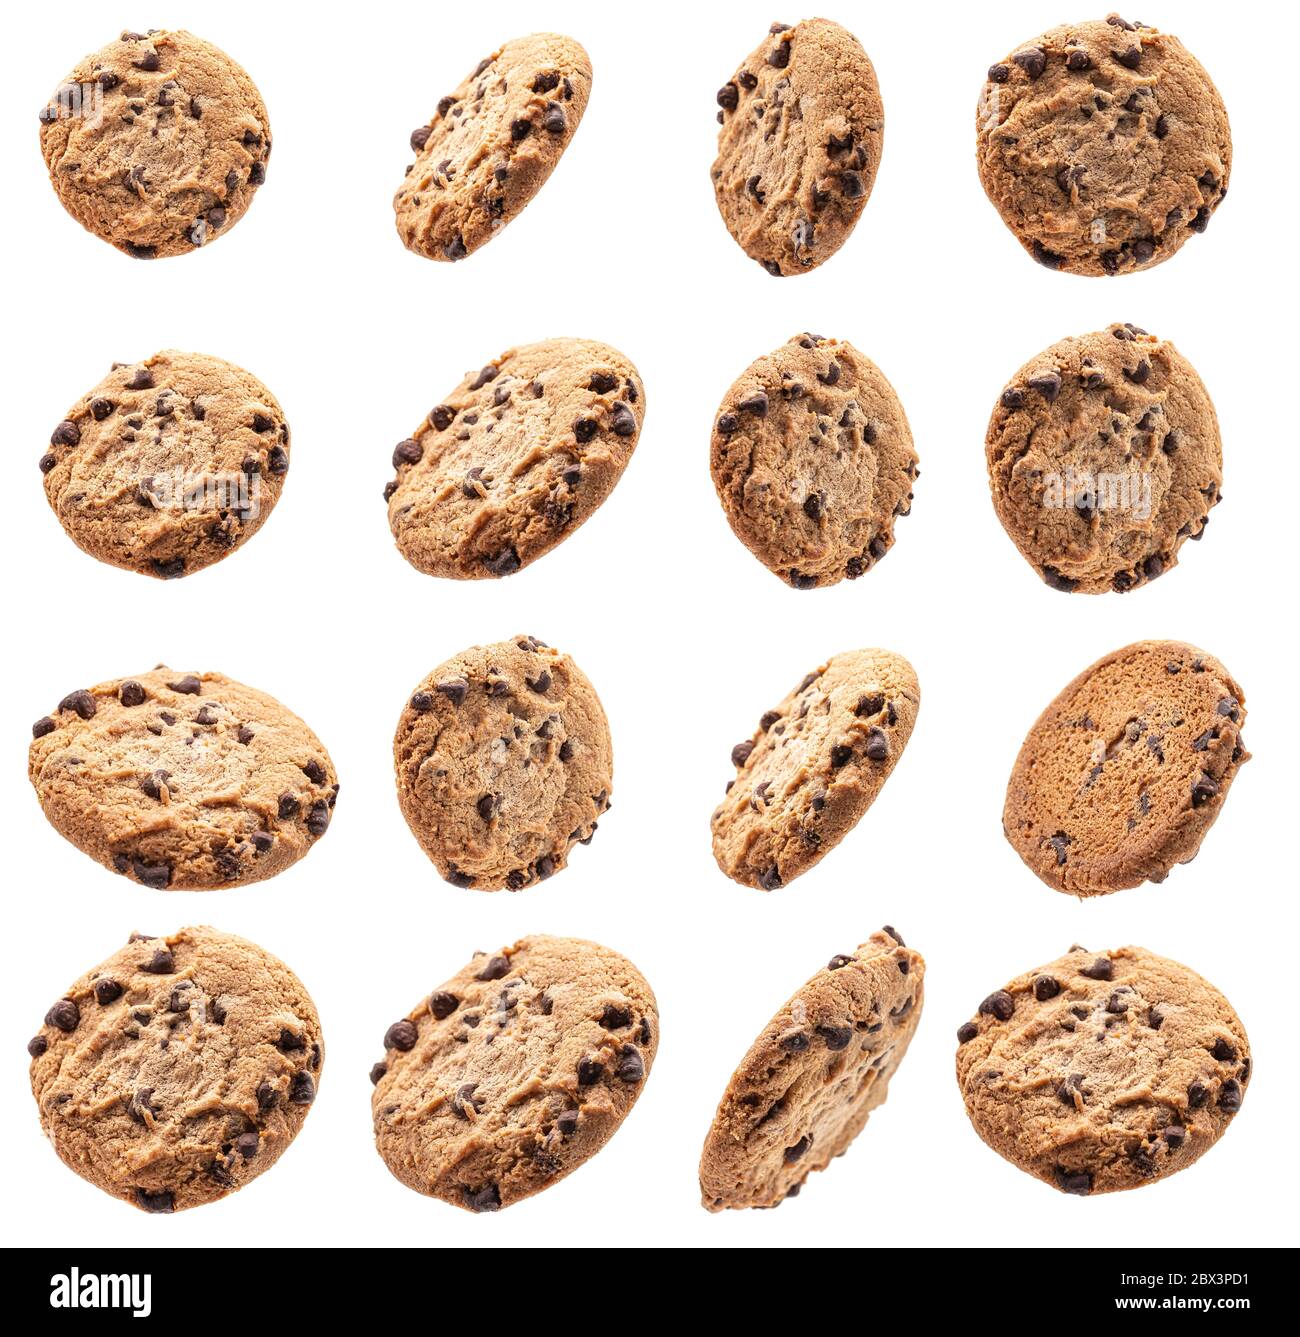 Collection of chocolate chip cookies on white background Stock Photo